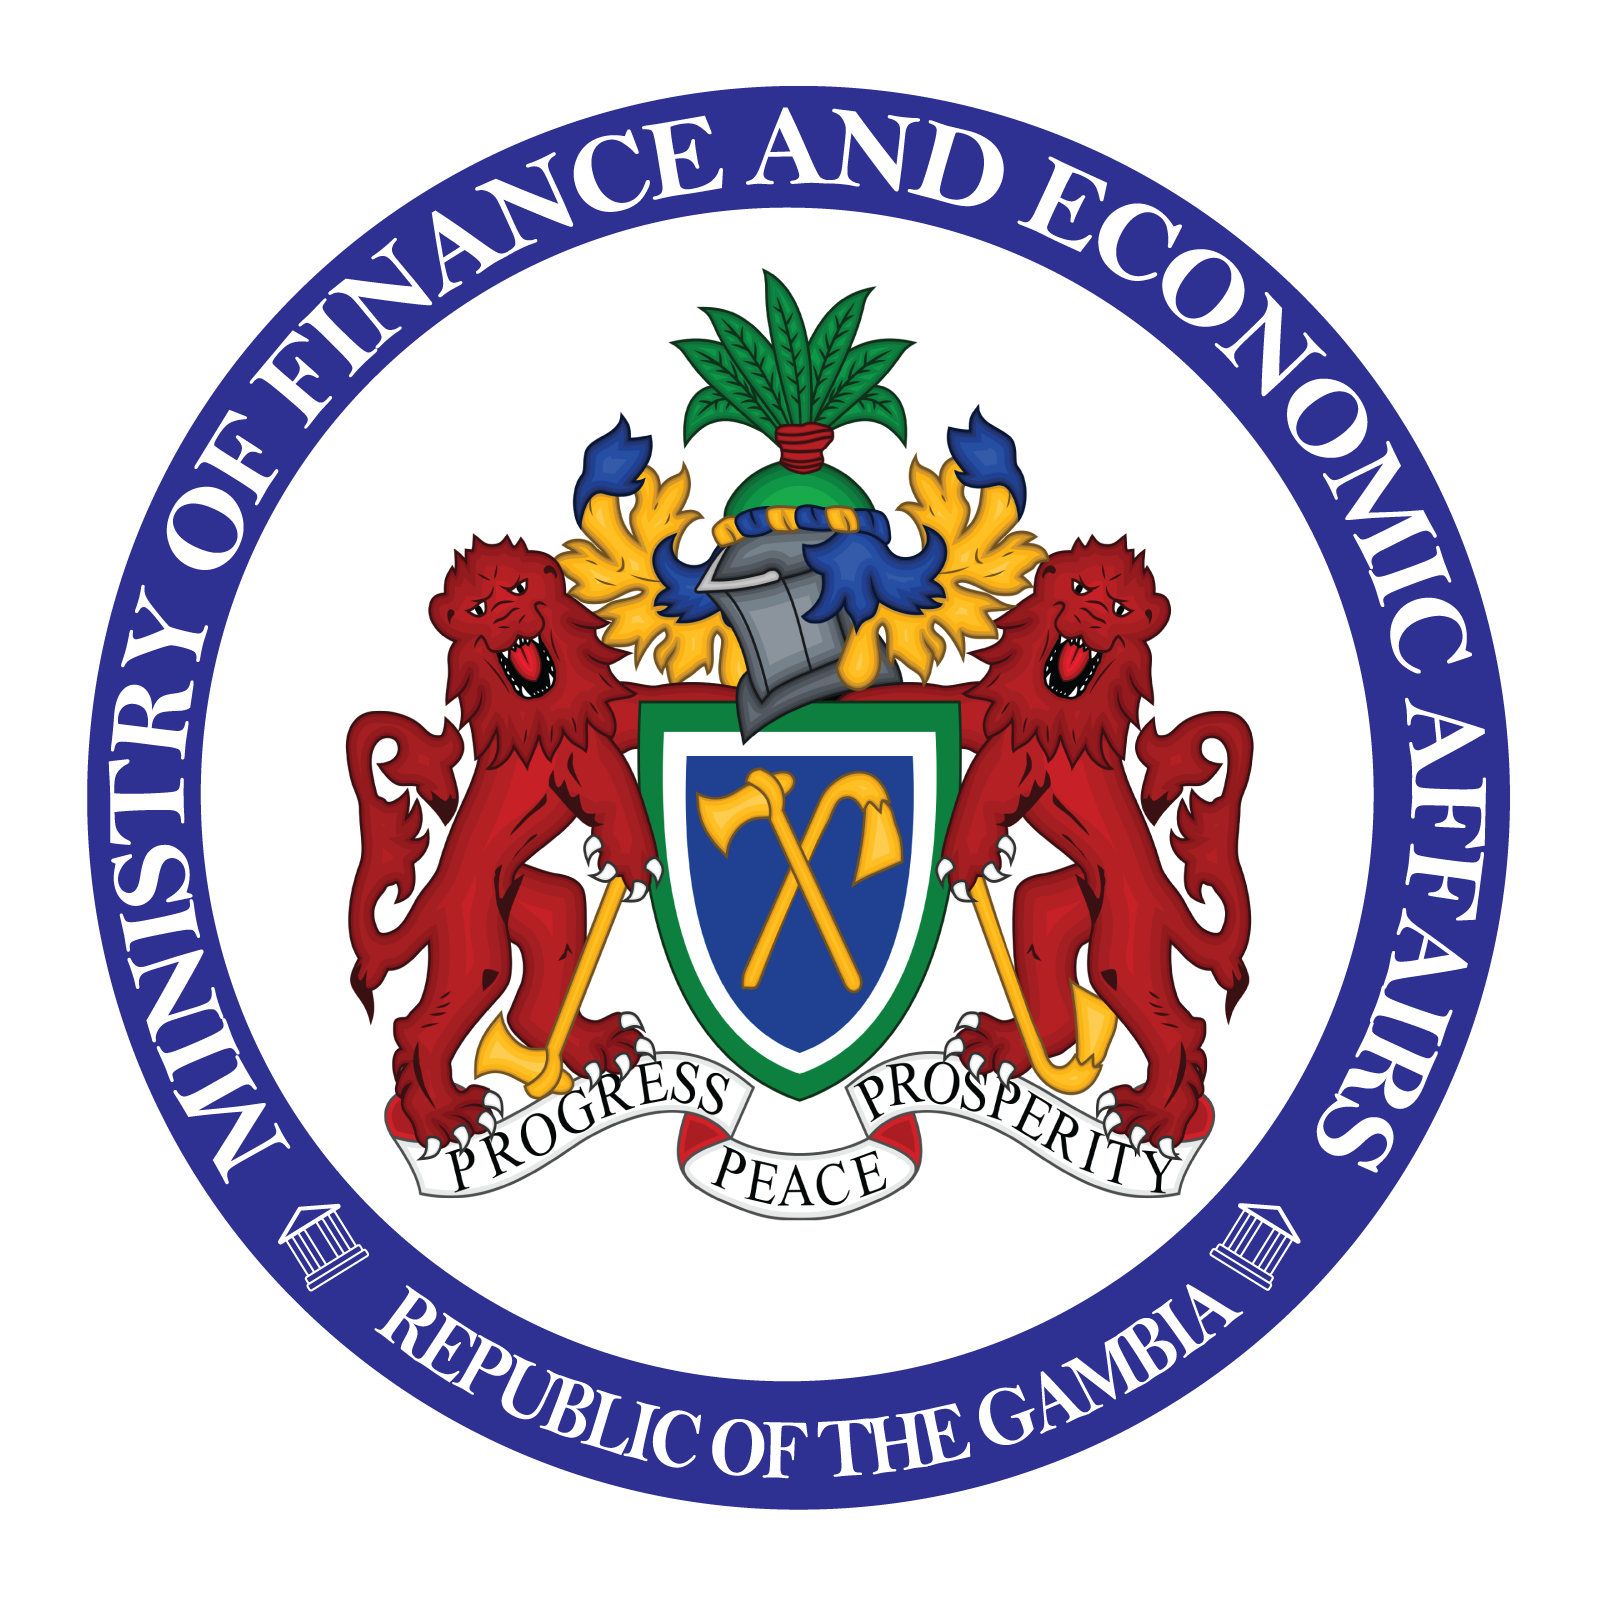 UNITED STATES EMBASSY COMPLIMENTS THE GAMBIA ON FISCAL TRANSPARENCY REPORT